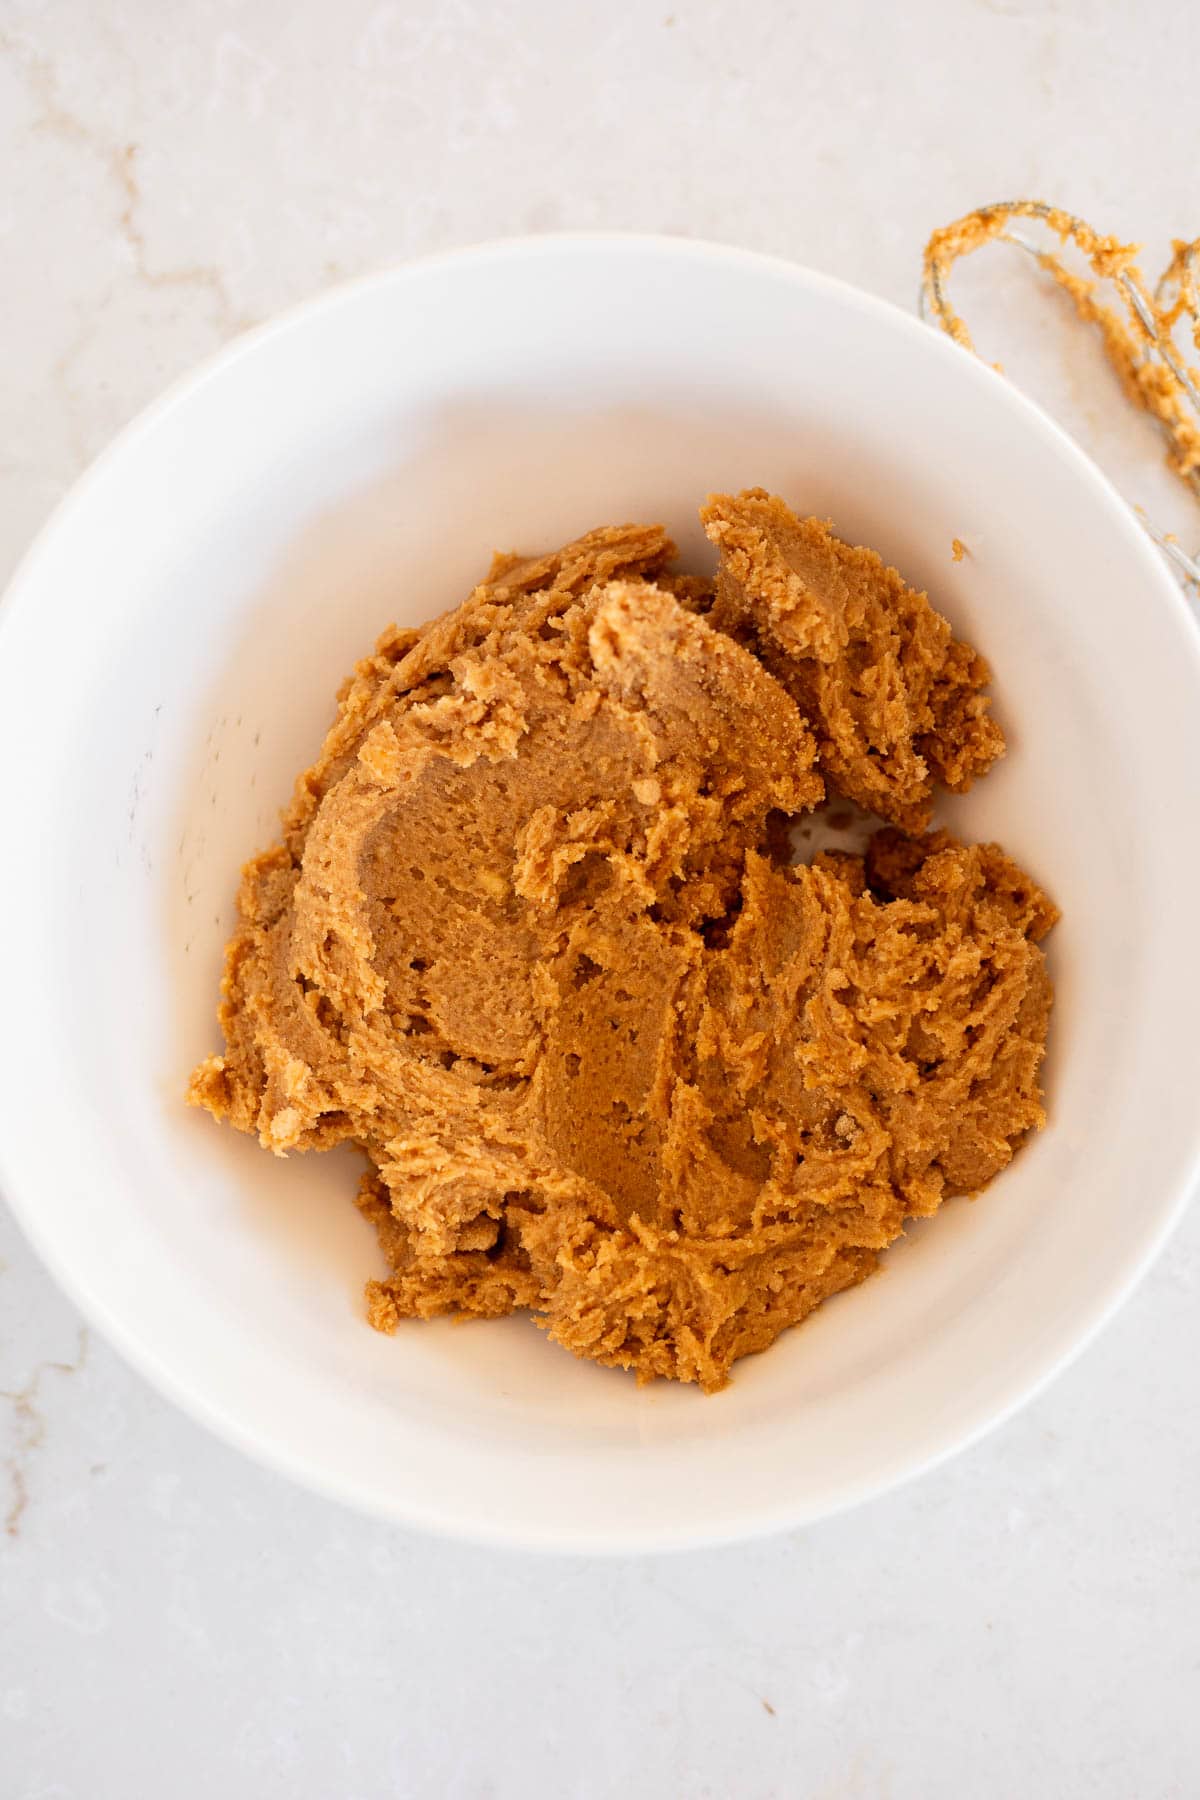 butter, peanut butter, and brown sugar mixed together in a white bowl.